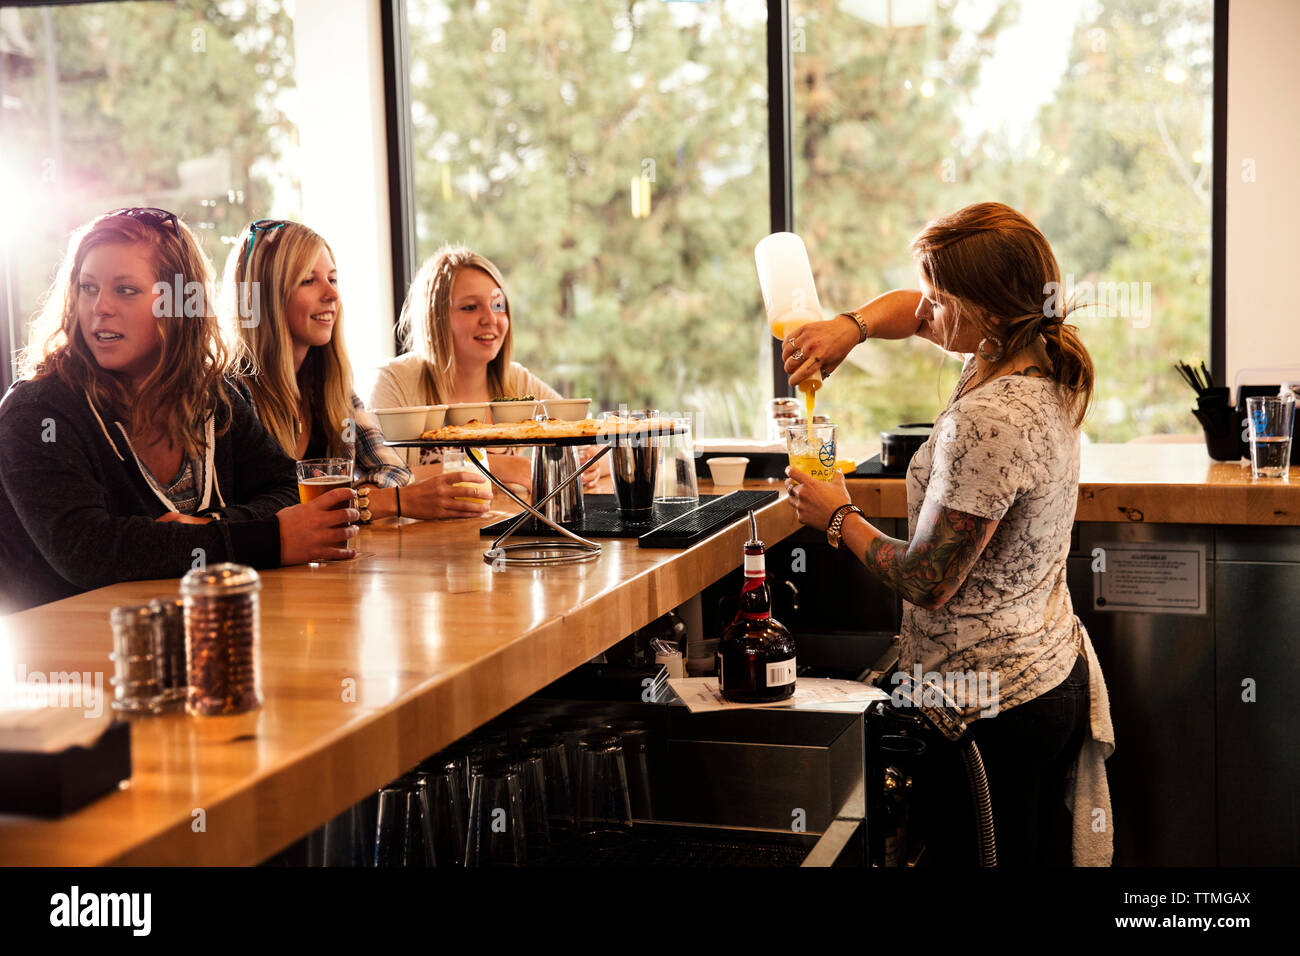 USA, Oregon, Bend, Pacific Pizza and Brew, people at bar & bartender Stock Photo